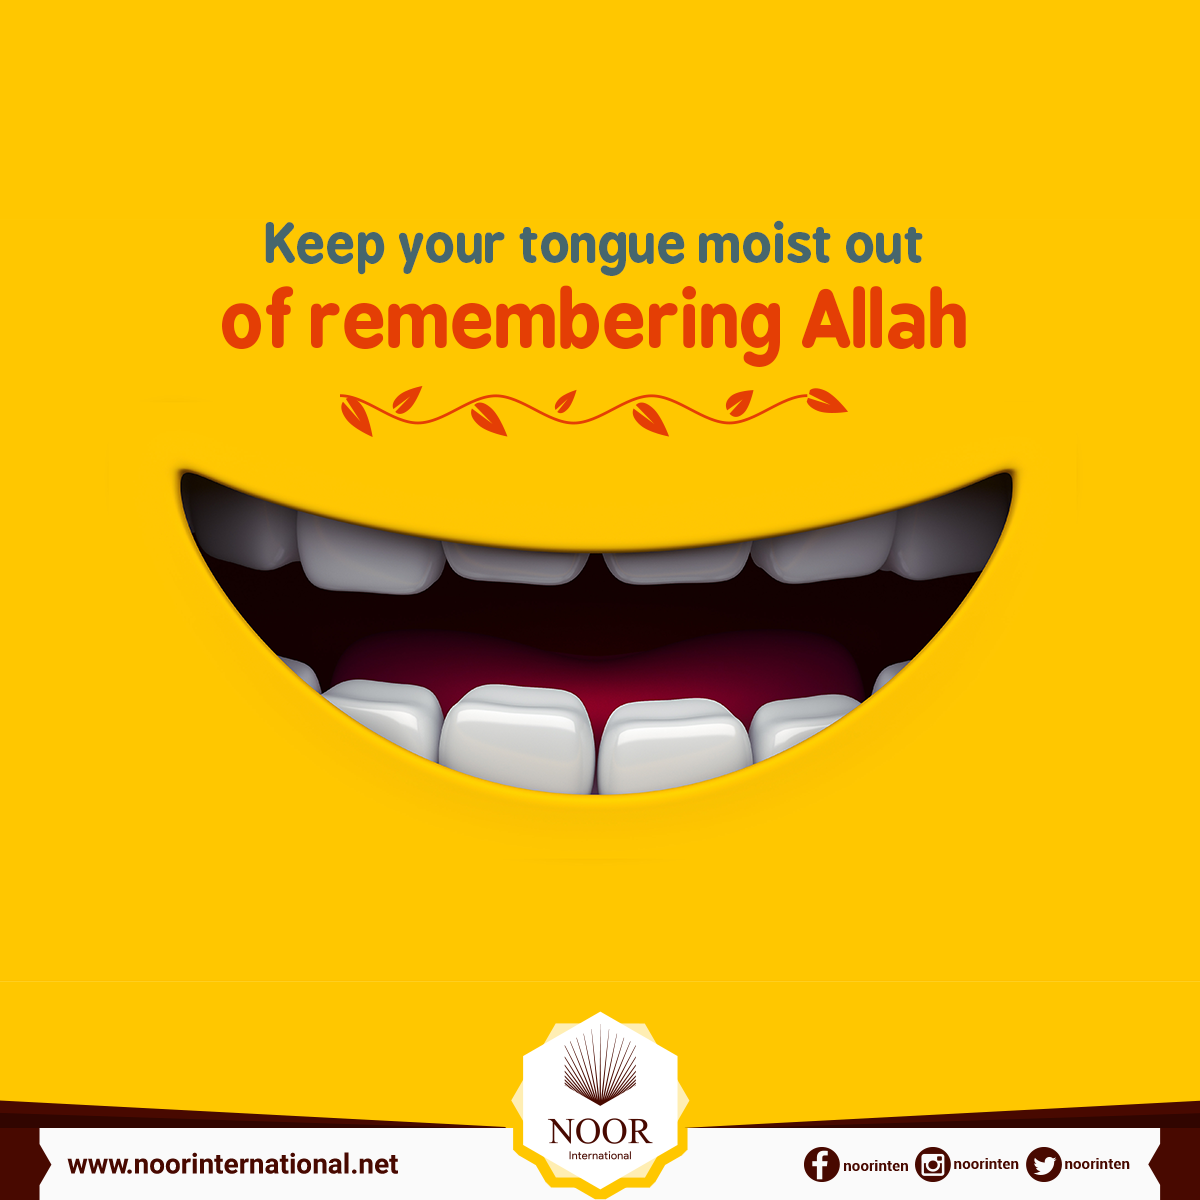 Keep your tongue moist out of remembering Allah